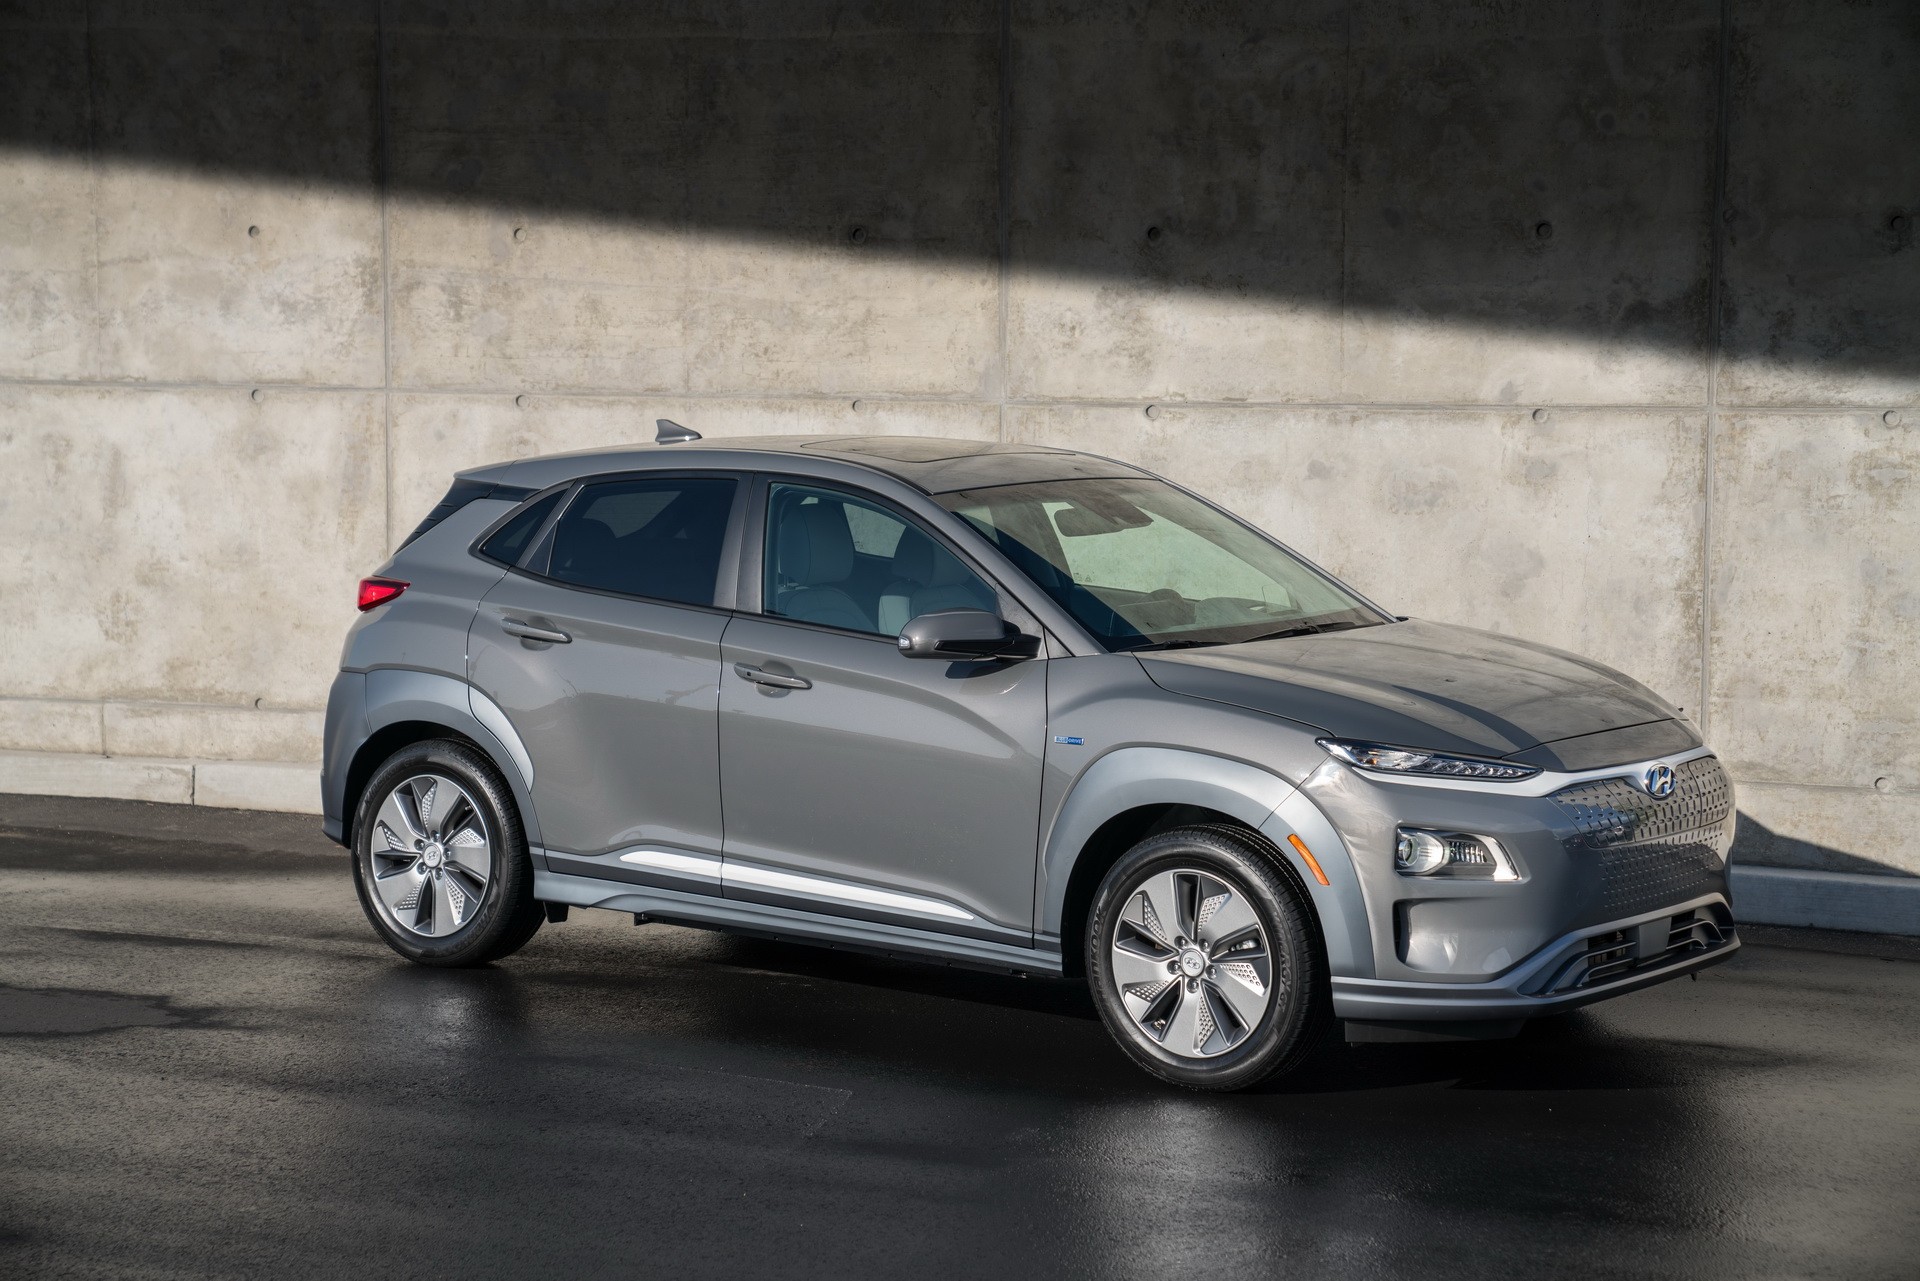 hyundai-kona-electric-does-0-to-100-kph-in-7-1-seconds-in-acceleration